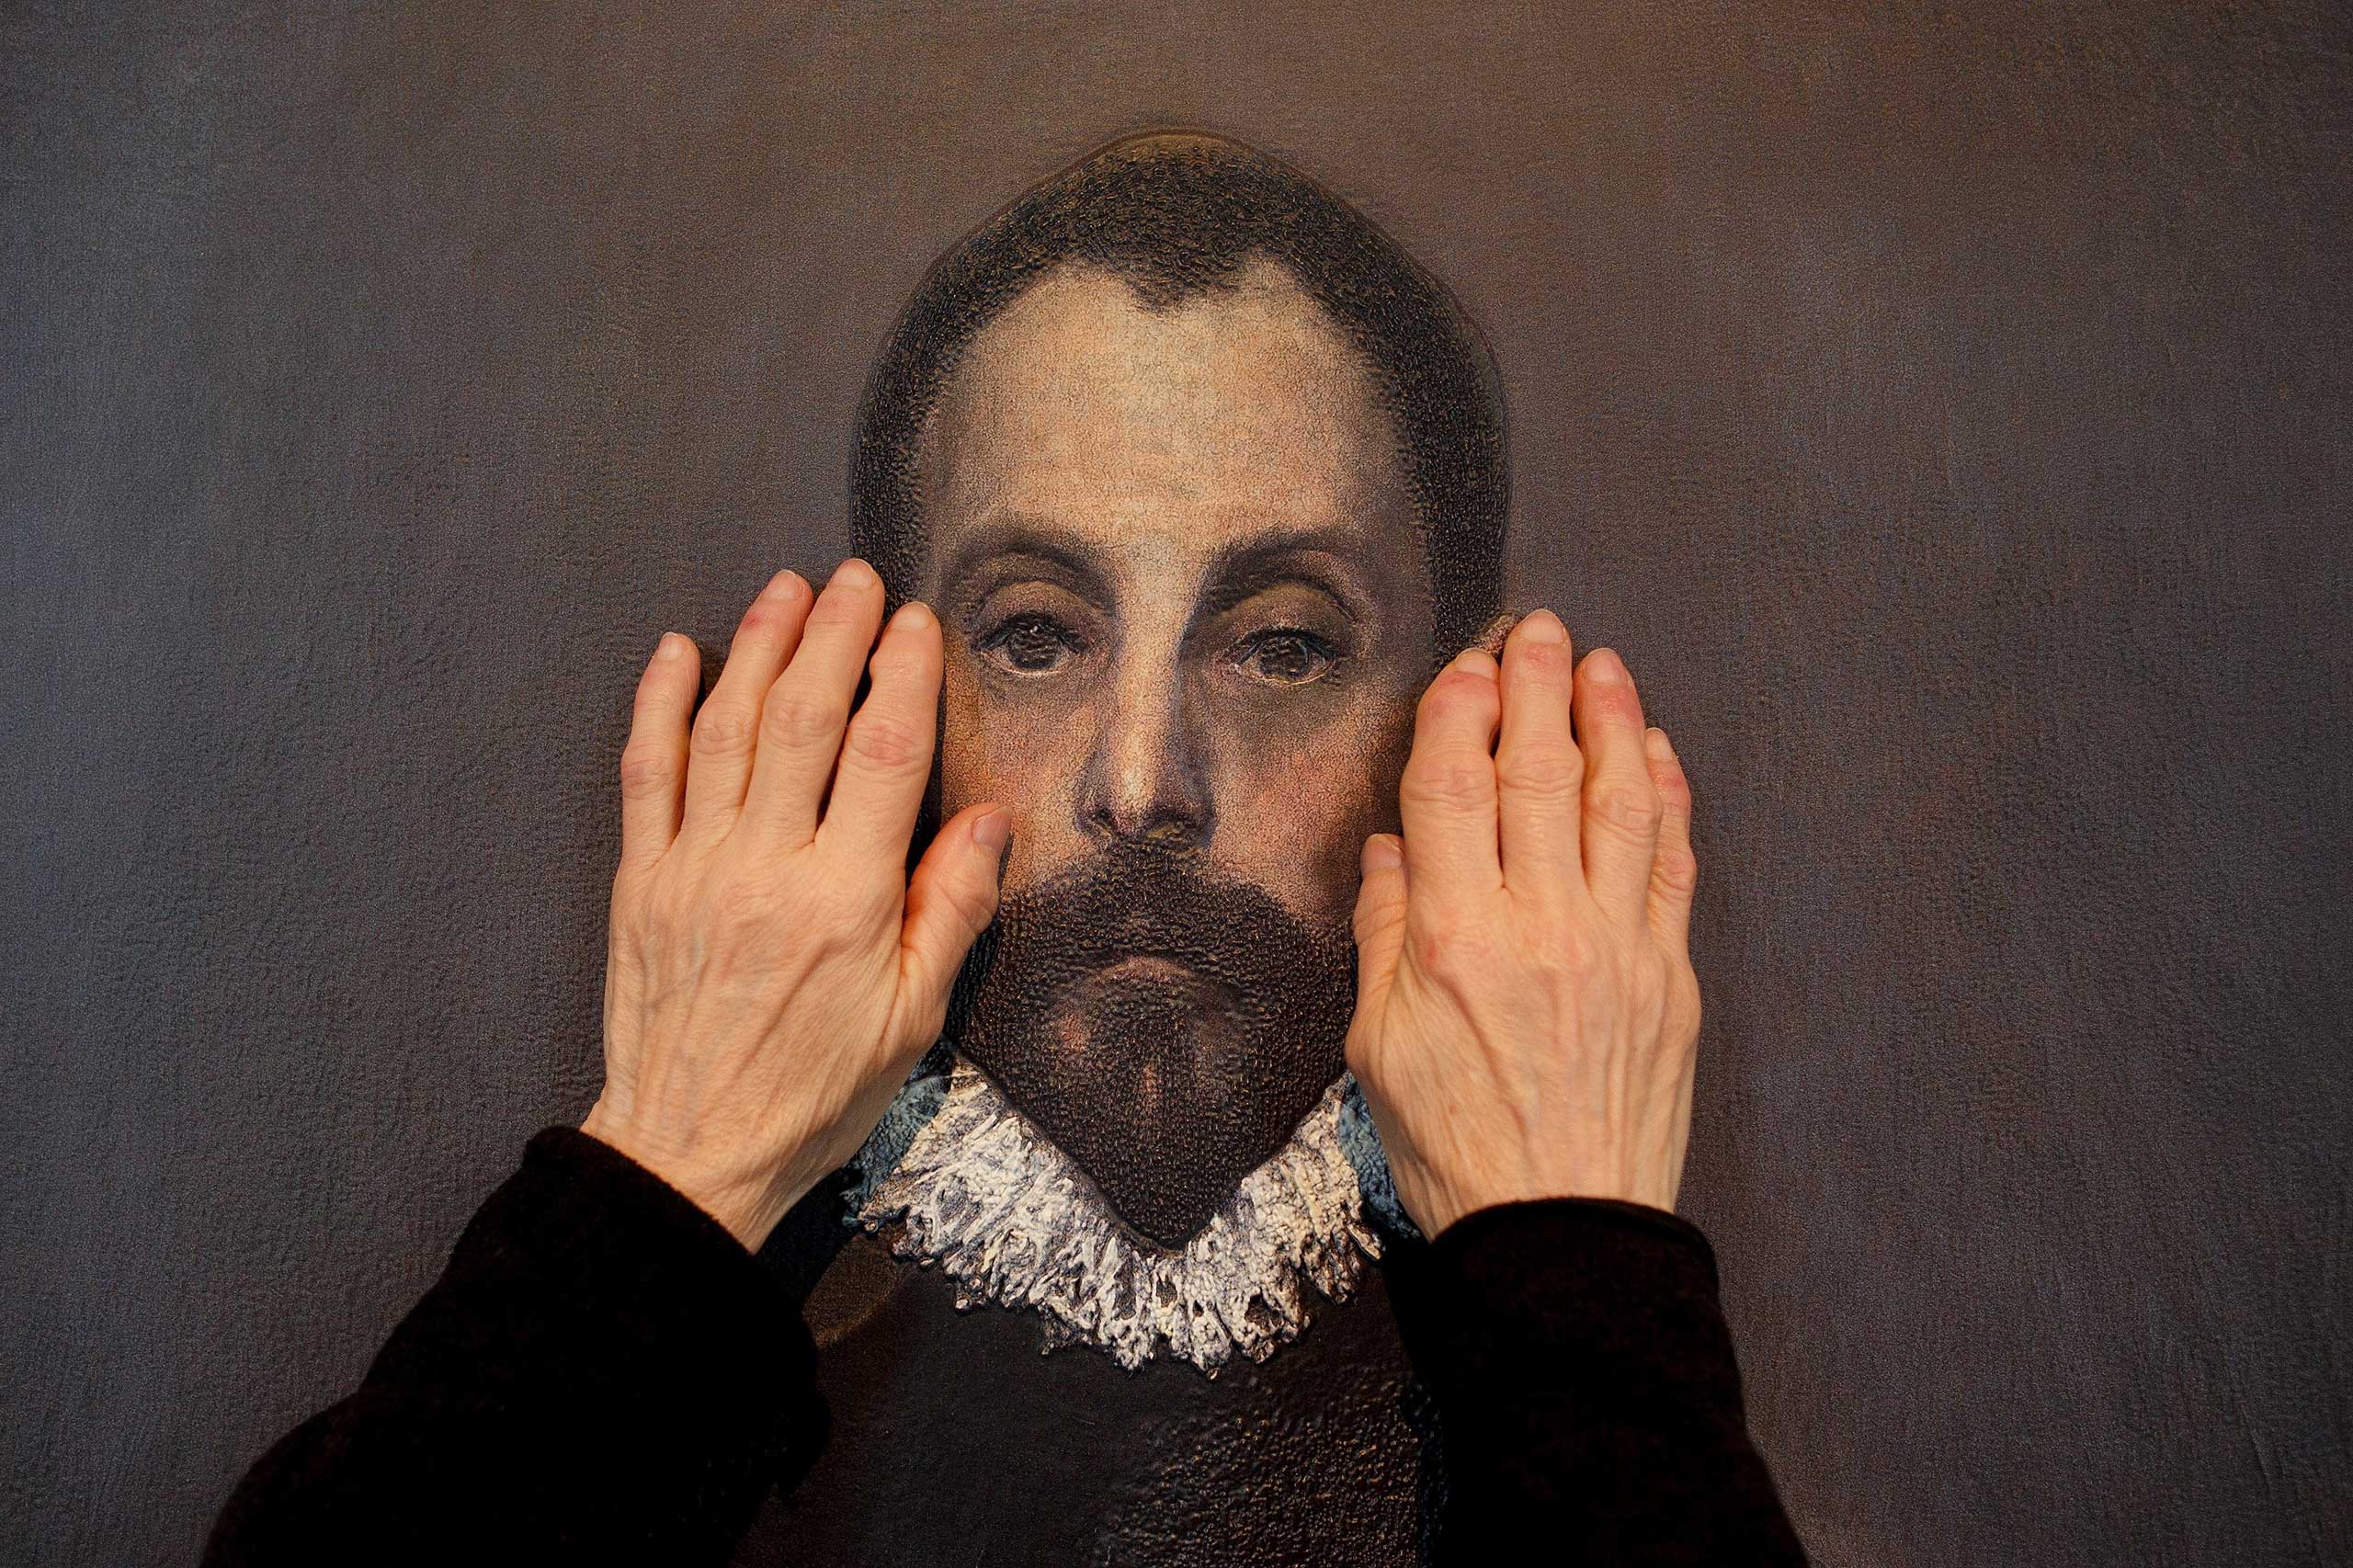 Feb. 10, 2015. A blind person feels a copy of 'The gentleman with his hand on his chest' of El Greco with her hands at The Prado Museum in Madrid. Hoy toca el Prado (Touch The Prado) allows blind or vision-impaired visitors to explore with their hands the copies of six masterworks. The copies were created using a technique called Didu which provides texture and volume to the paintings.